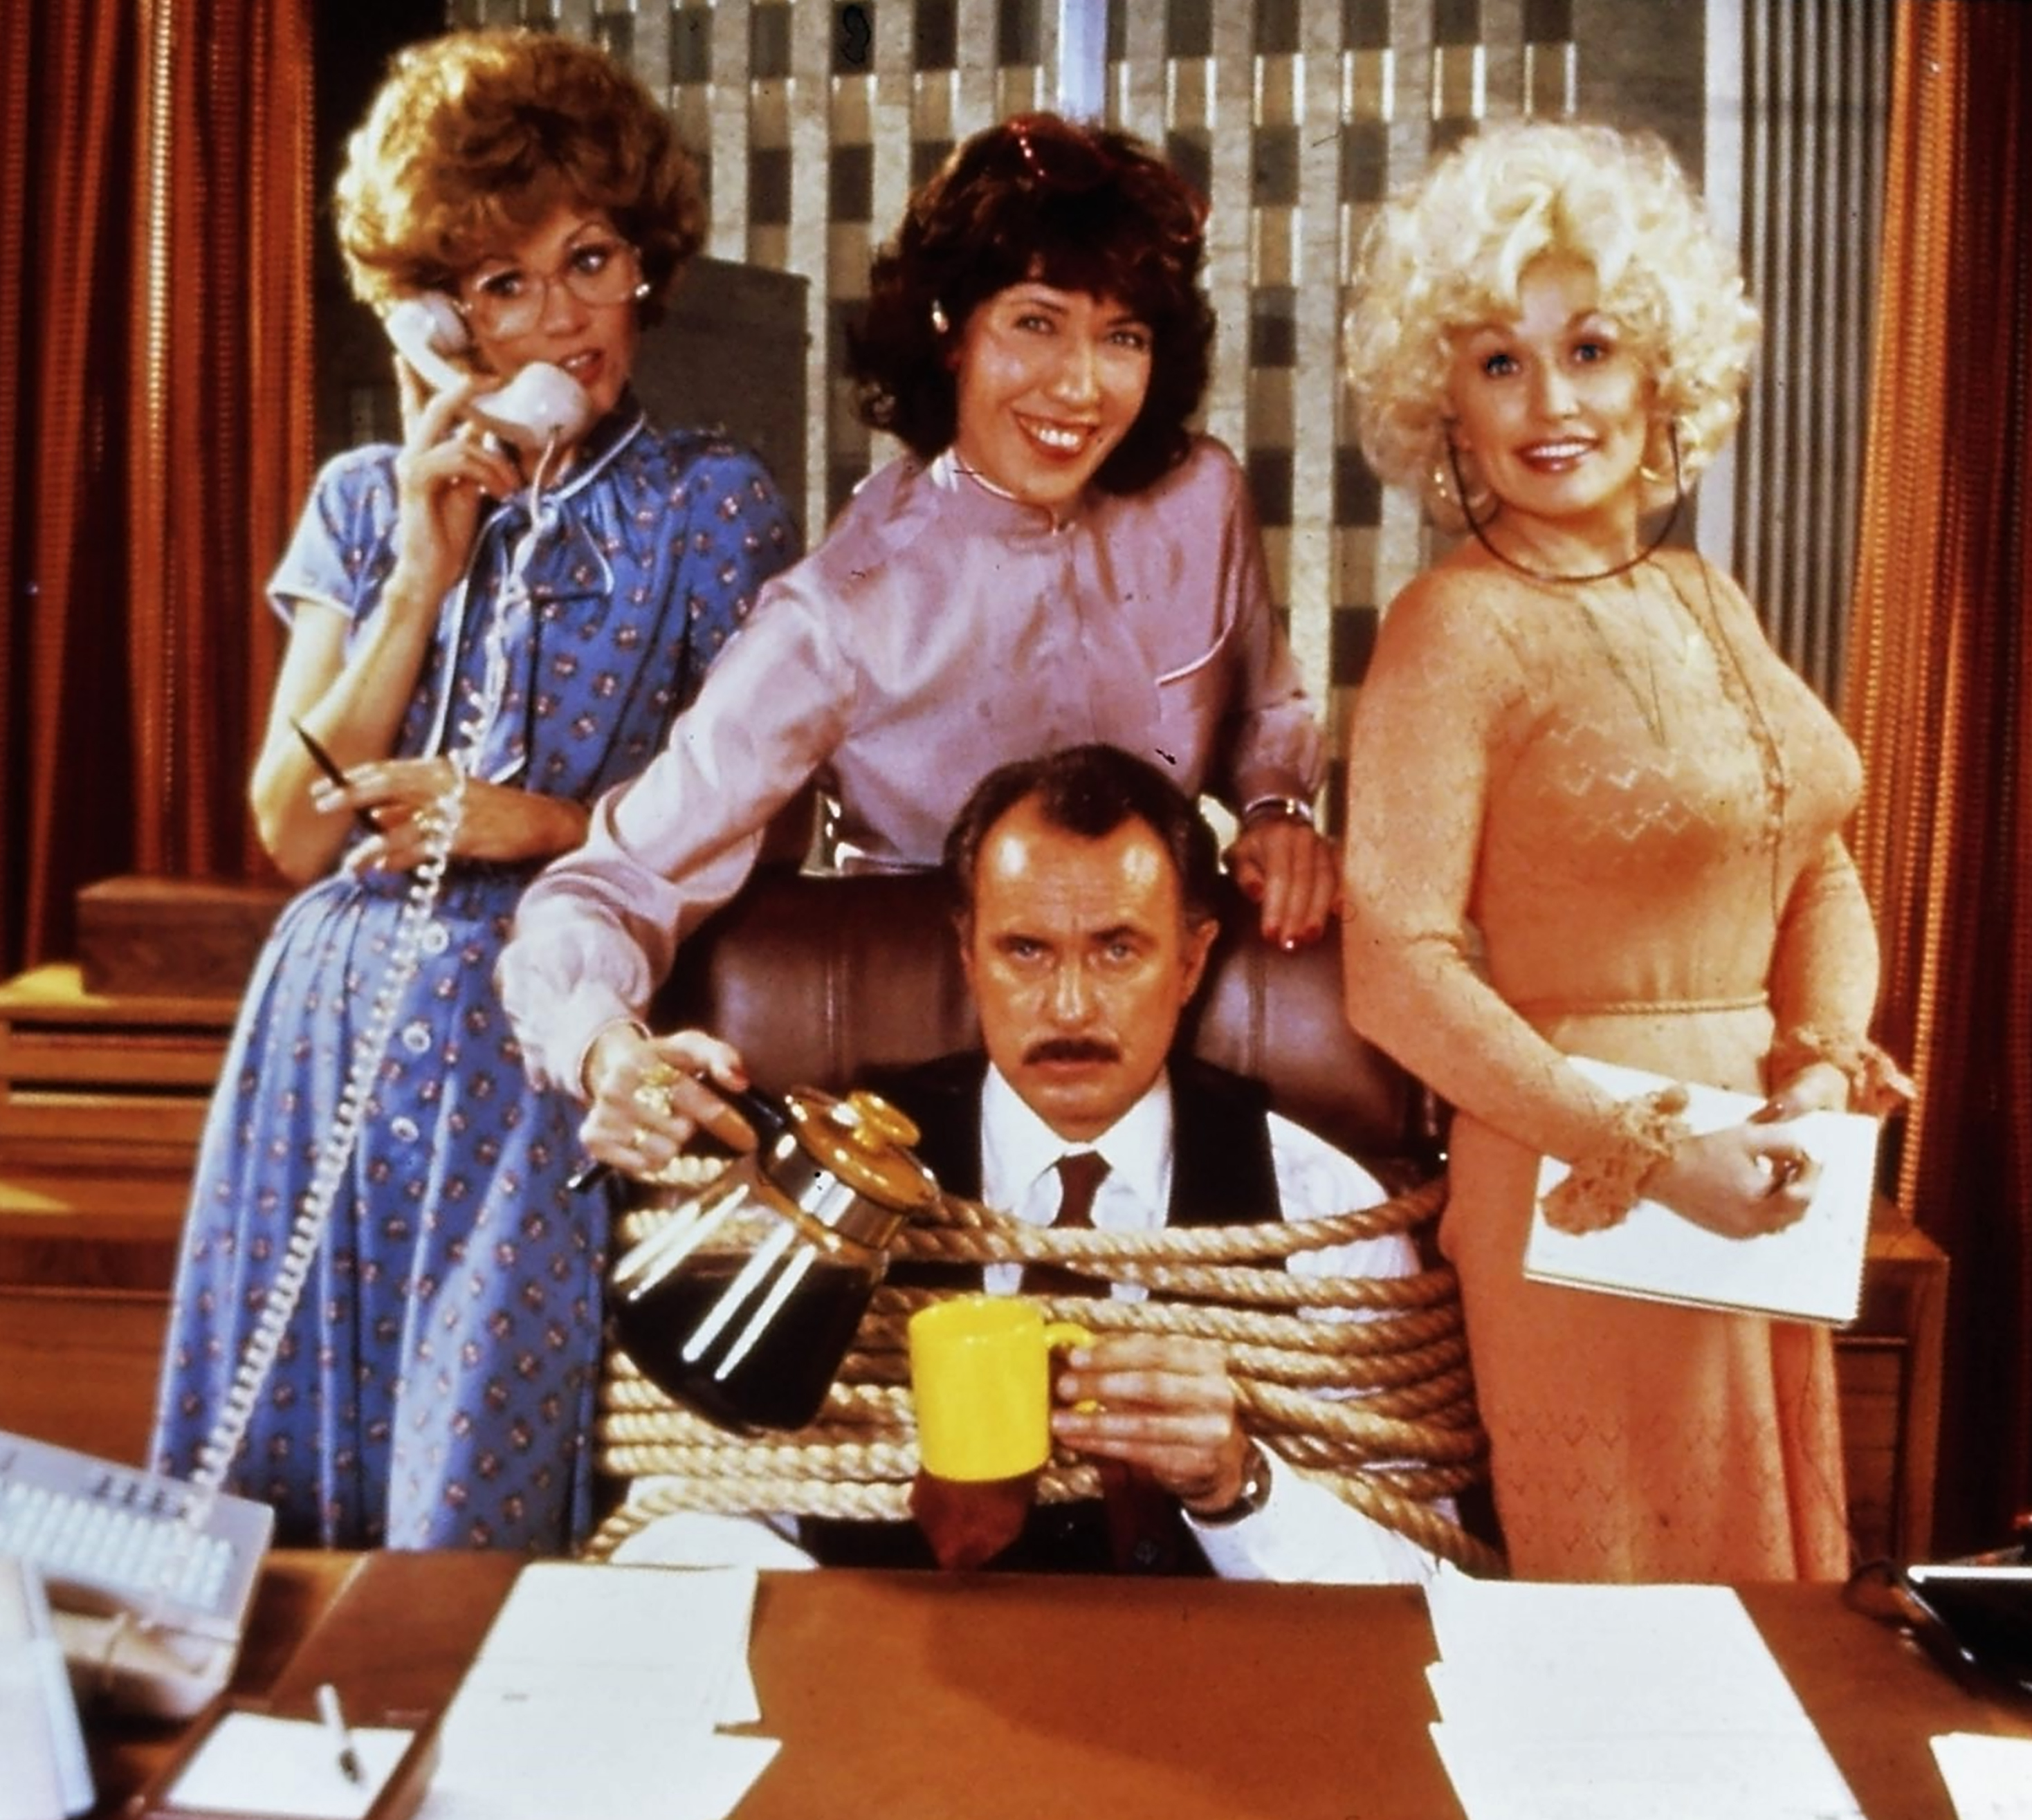 Jane Fonda, Dolly Parton, Dabney Coleman, and Lily Tomlin in “9 to 5” (1980)